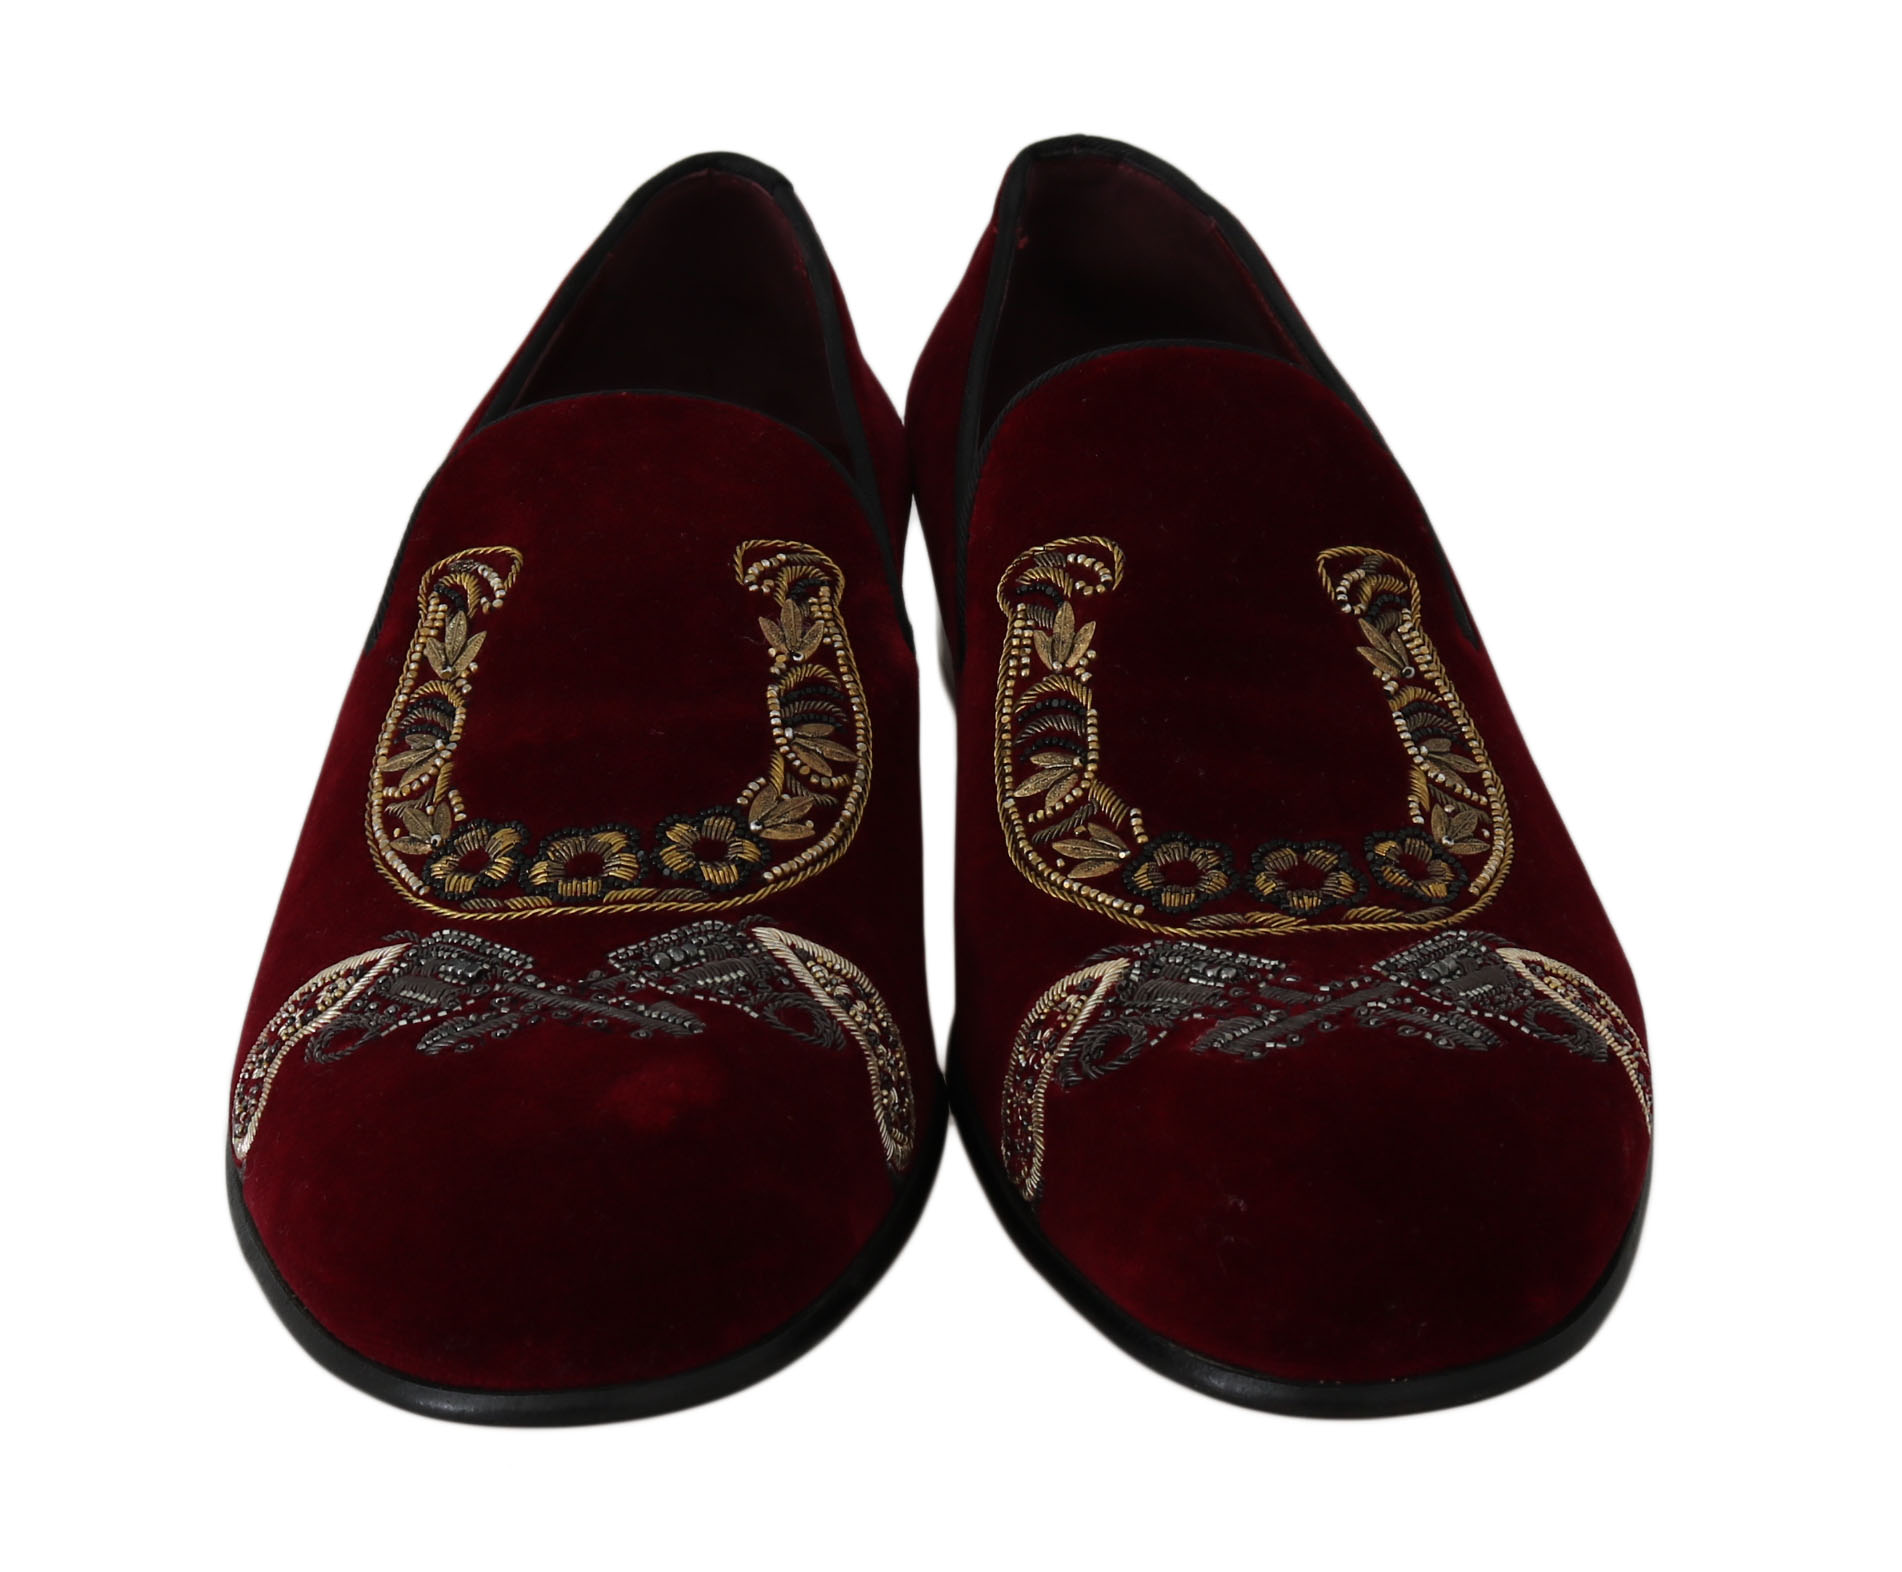 DOLCE & GABBANA RUNWAY Baroque Style Velour Shoes Bordeaux Red 03881 